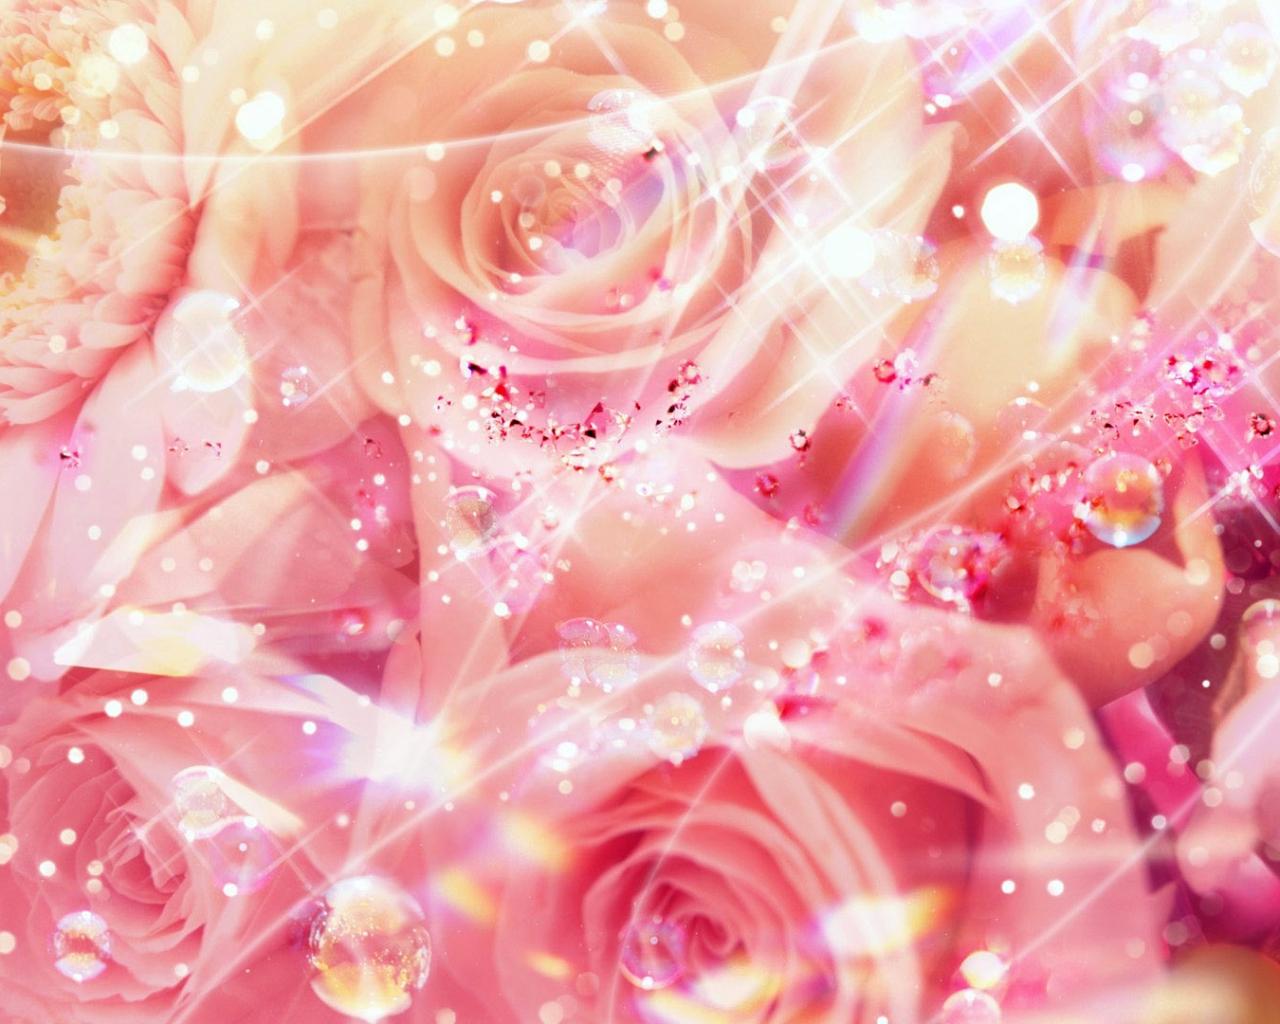 Shine of roses 1280x1024